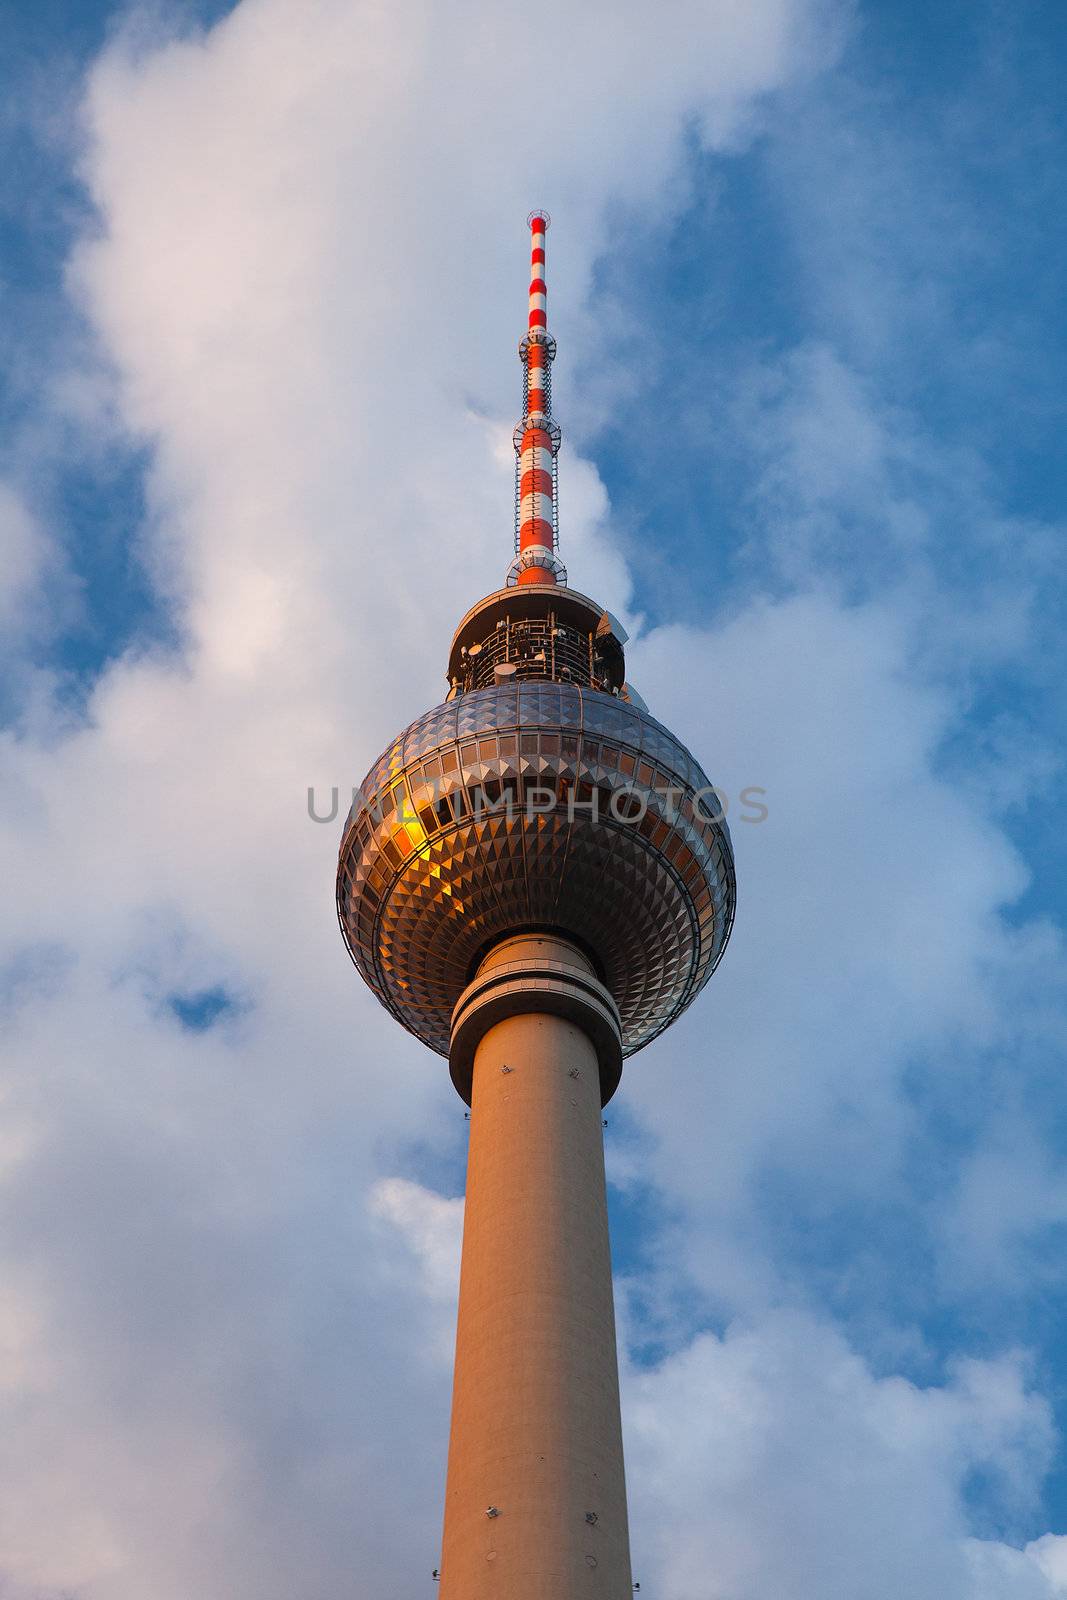 Perspective view up of Berlin TV tower in Germany